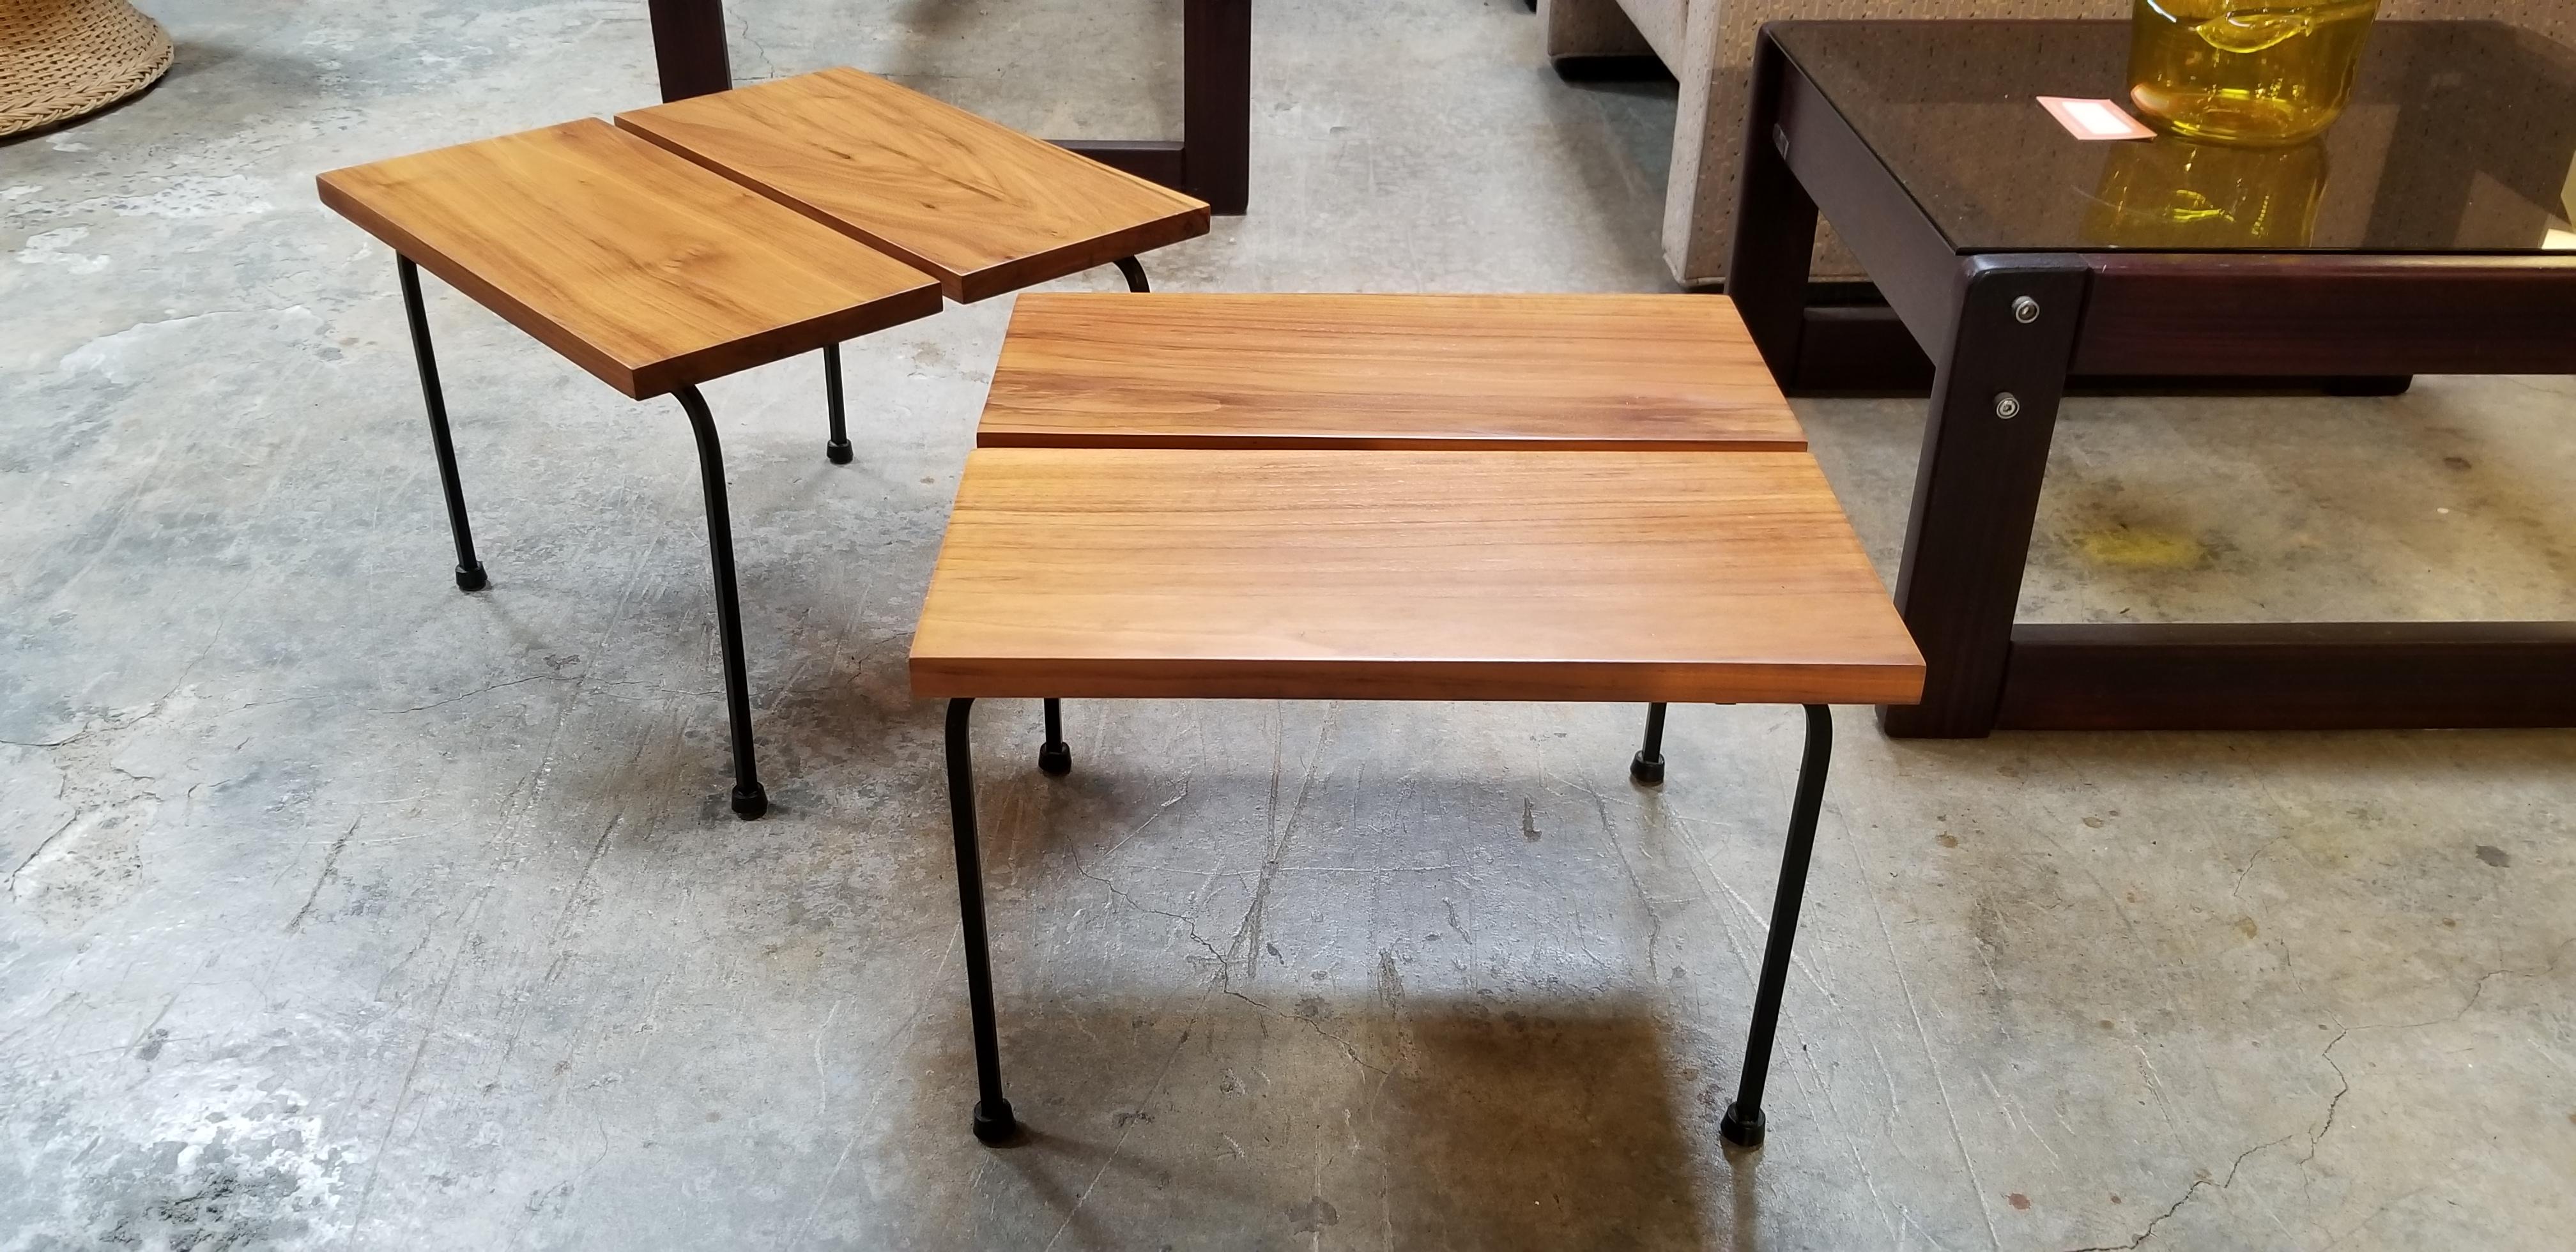 Ficks Reed Steel and Wood End Tables In Good Condition For Sale In Fulton, CA